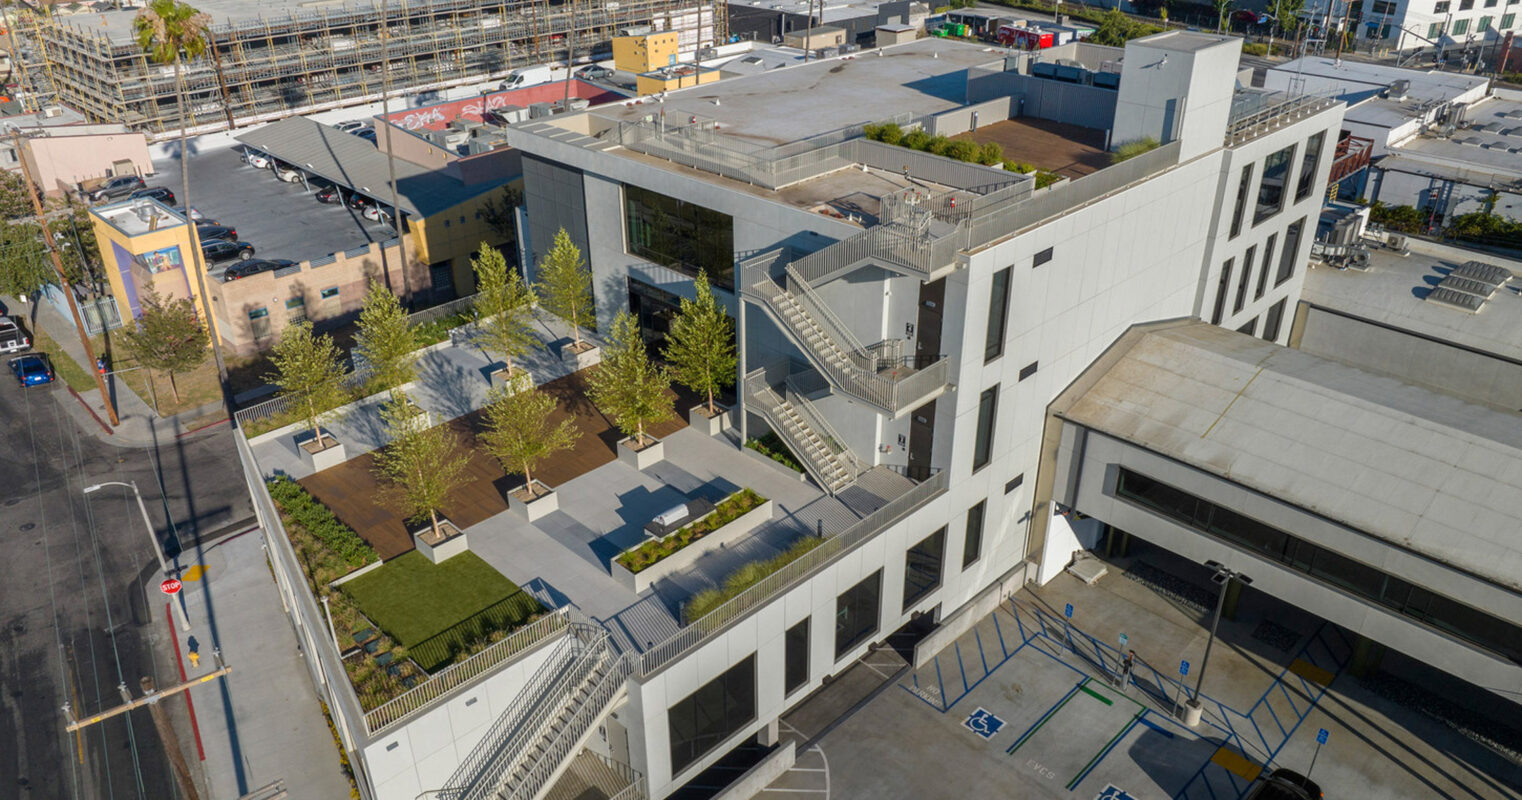 Modern urban building complex viewed from above, featuring geometric architectural design with a rooftop garden, expansive windows, and tiered terraces that promote a blend of indoor-outdoor space.